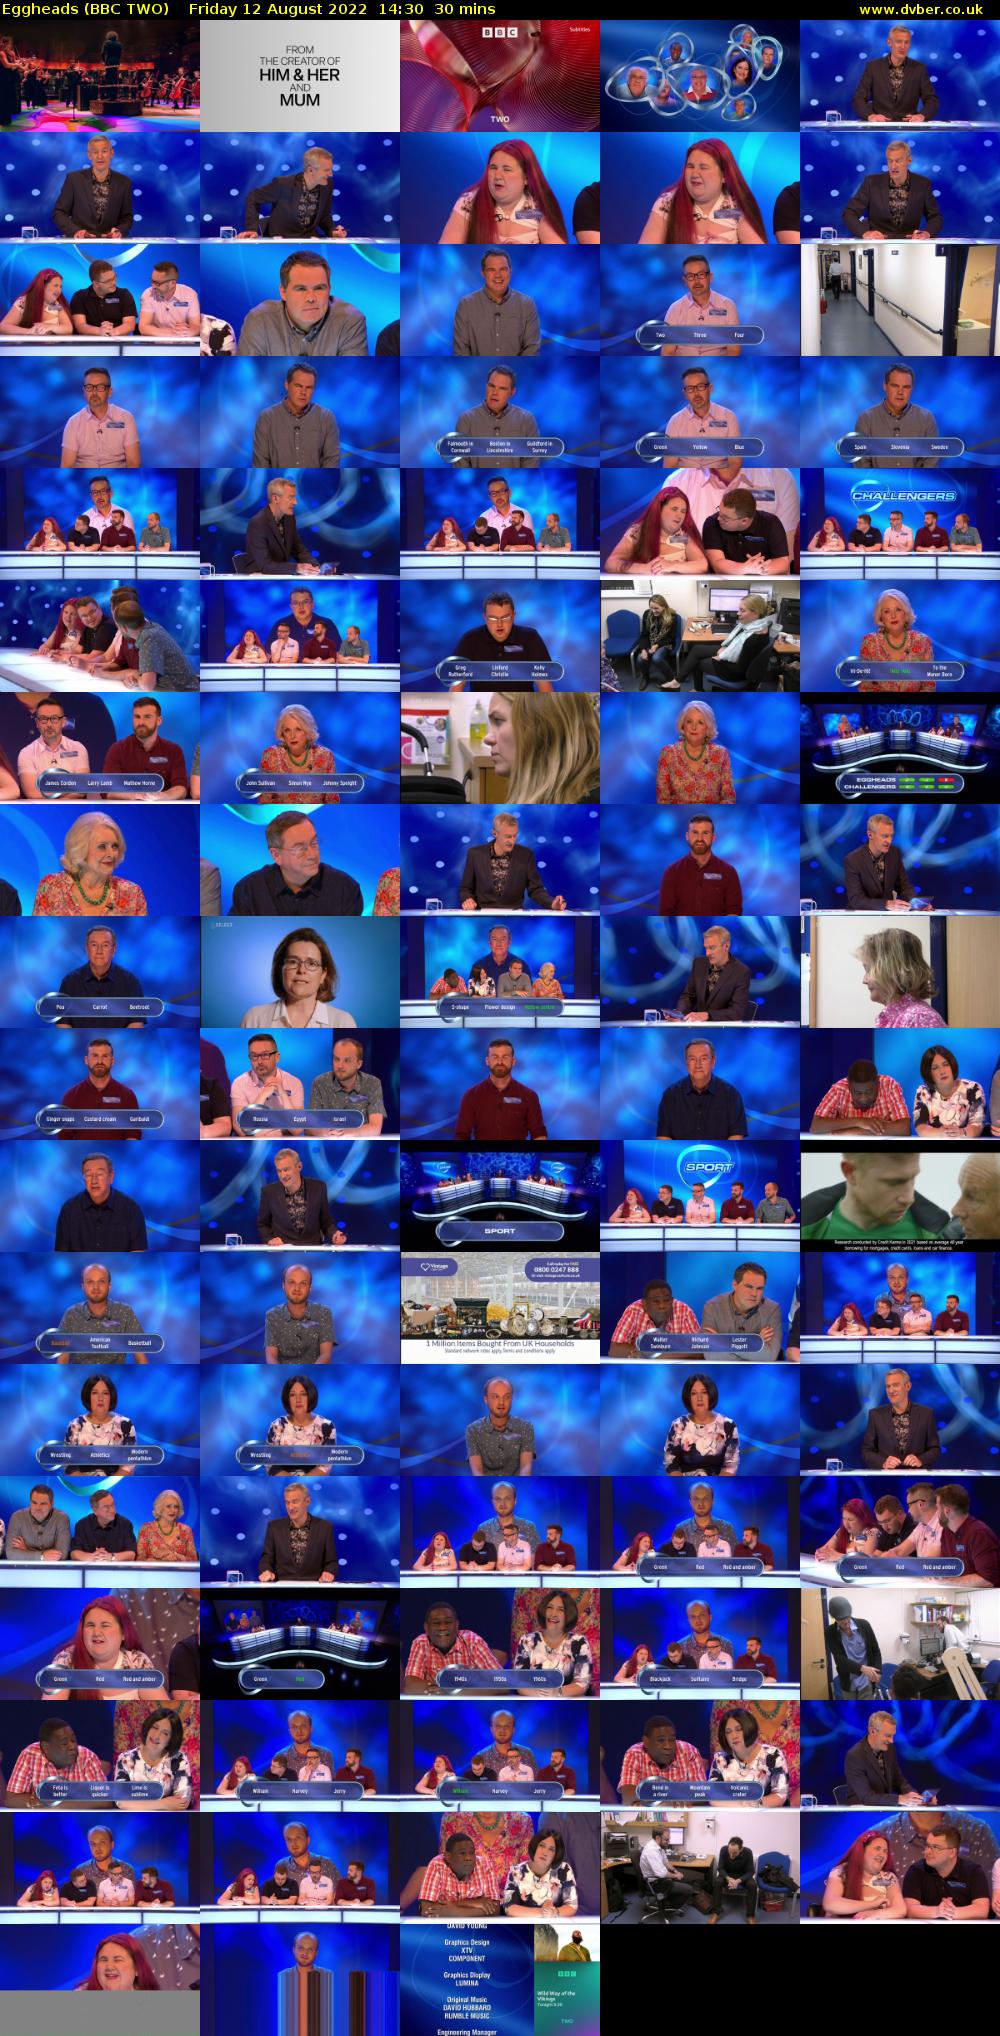 Eggheads (BBC TWO) Friday 12 August 2022 14:30 - 15:00